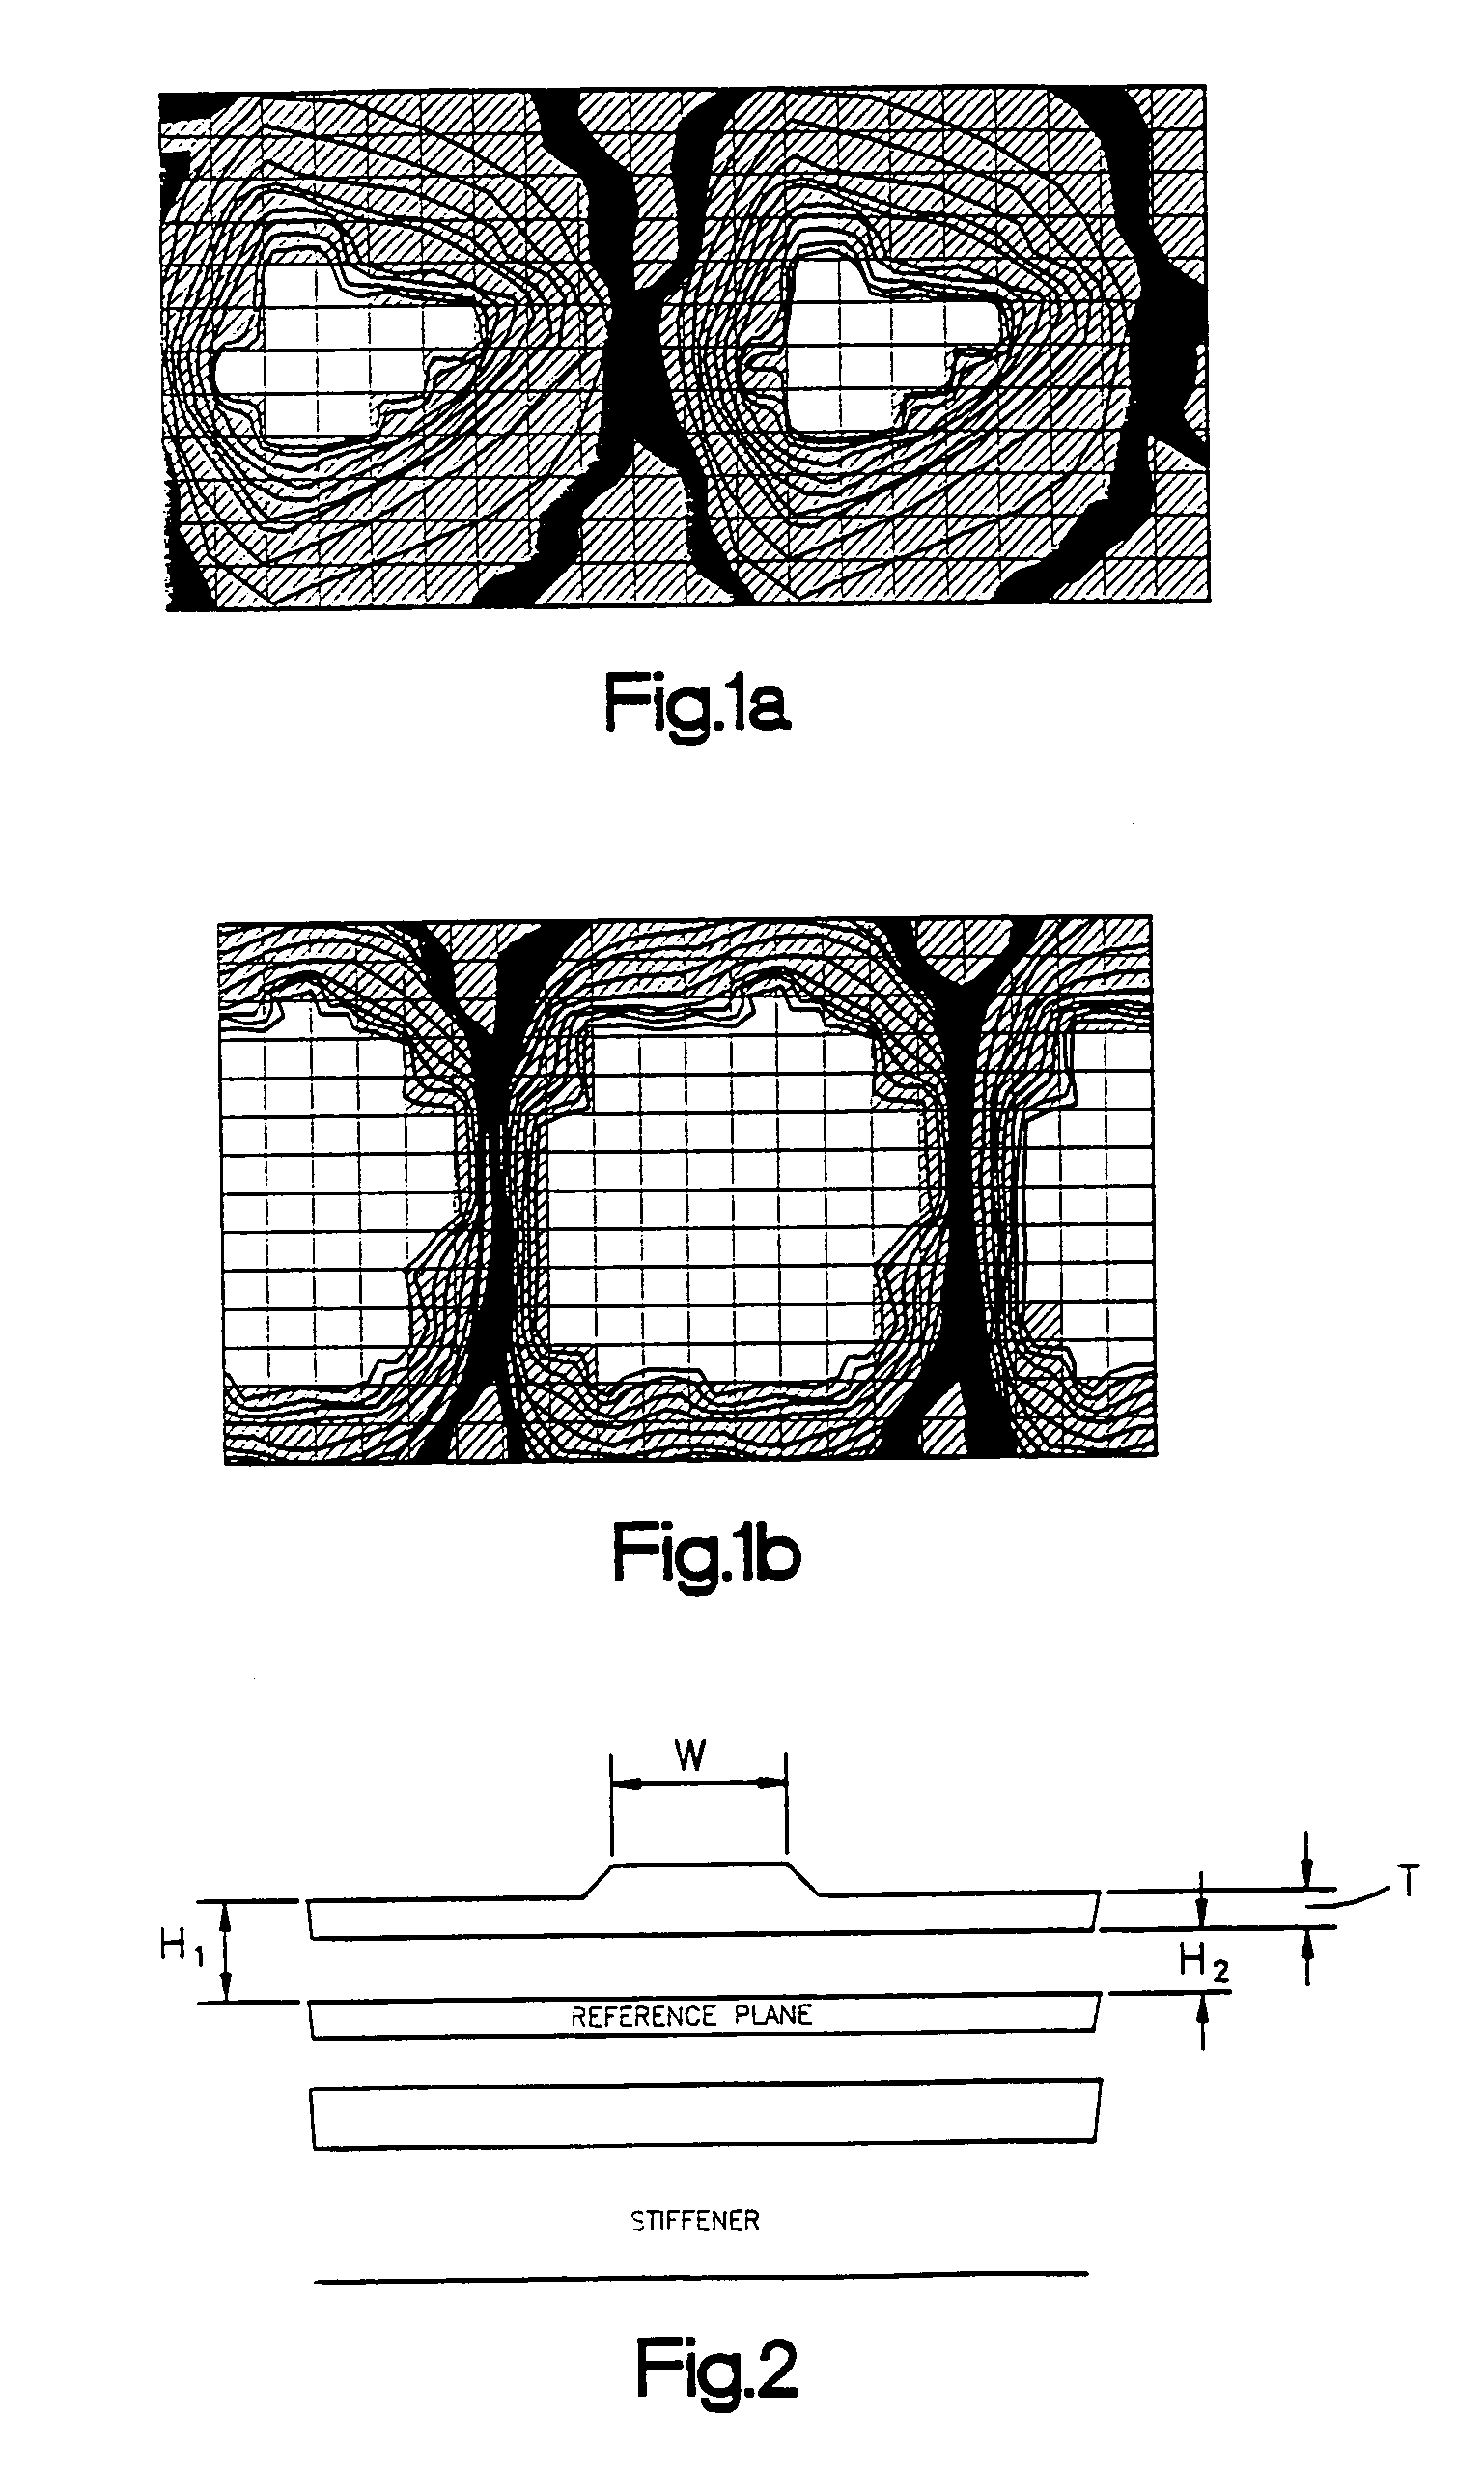 Coaxial via structure for optimizing signal transmission in multiple layer electronic device carriers